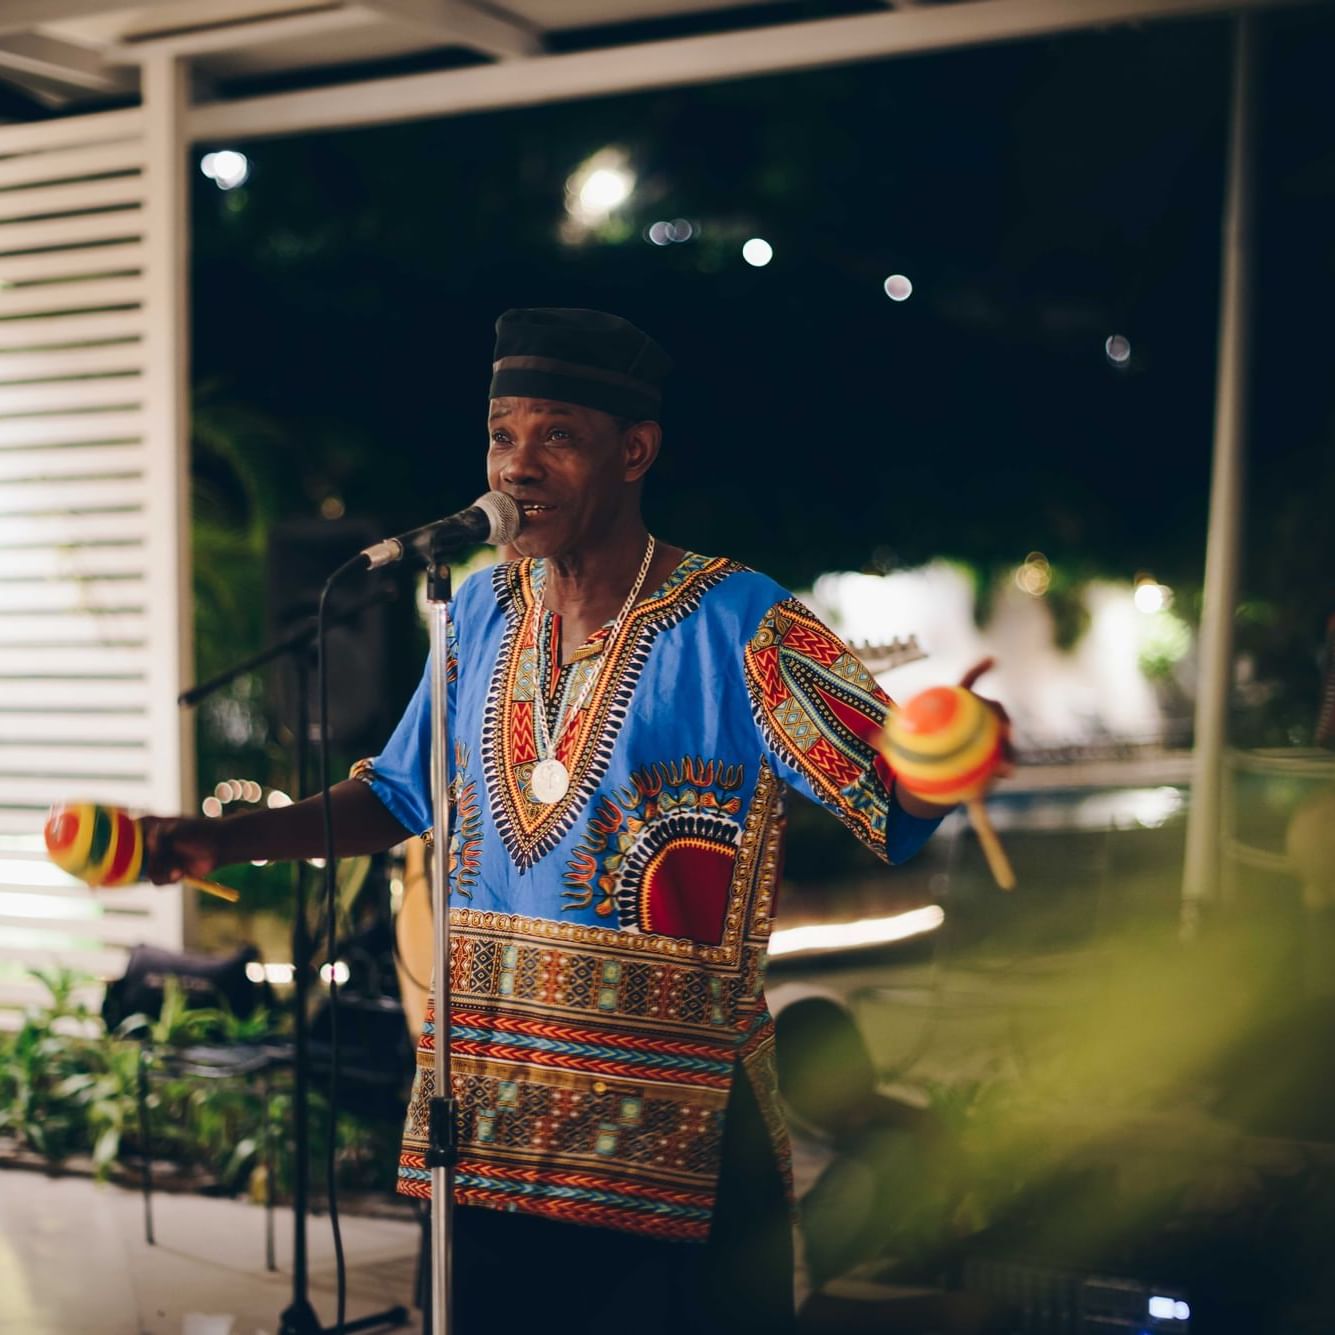 Singing live performance by the pool at Hotel Montana Haiti